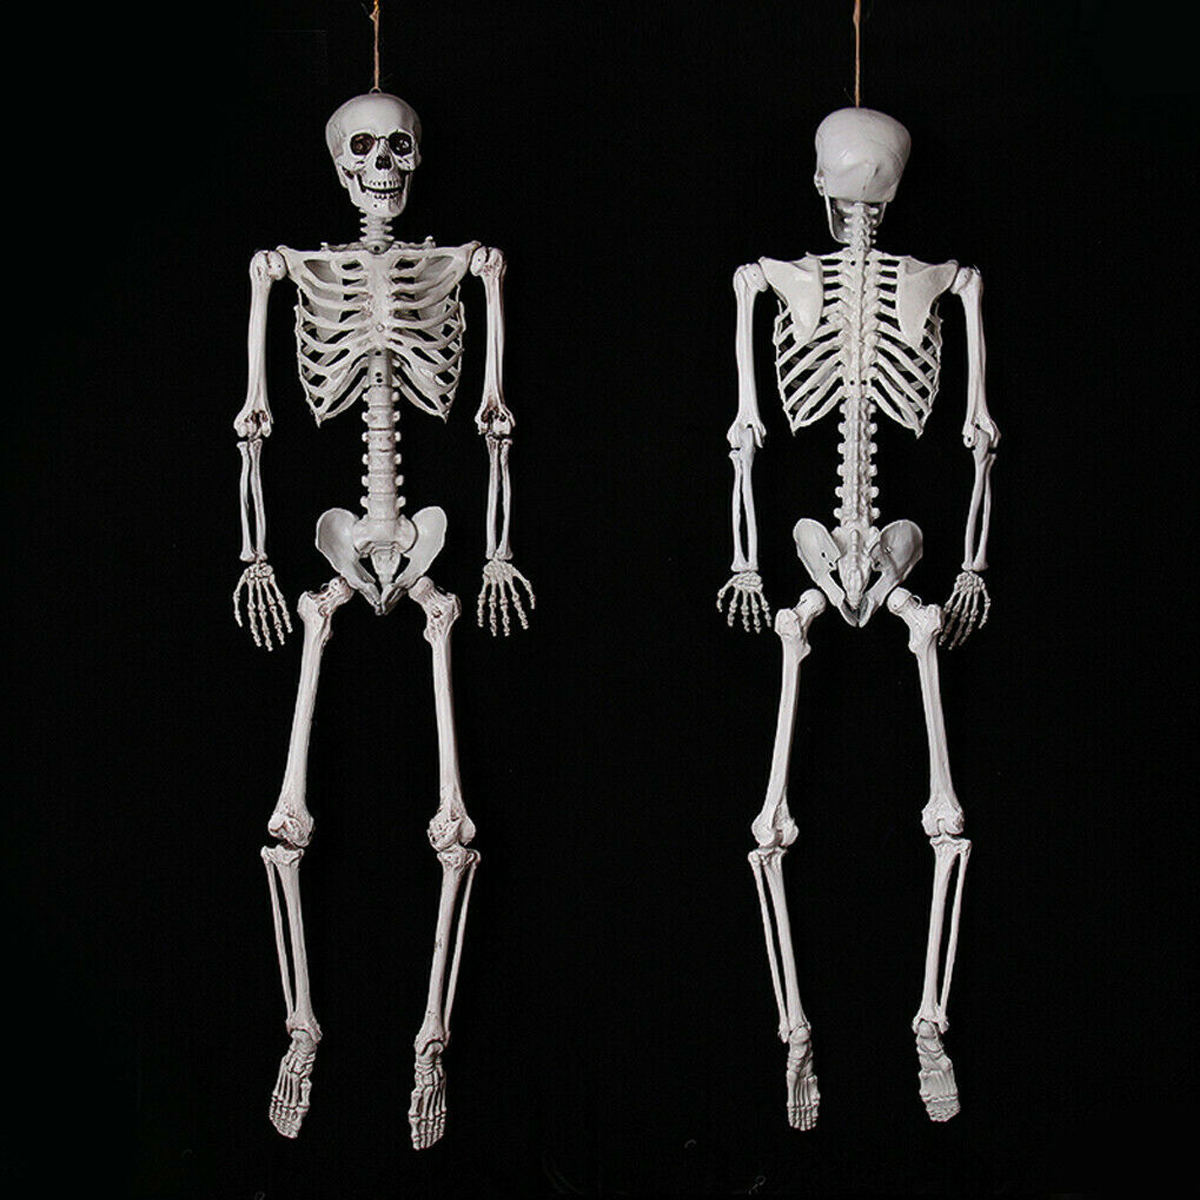 90cm-Human-Skeleton-Scary-Bones-Poseable-Hanging-Halloween-Prop-Party-Decorations-1573645-5